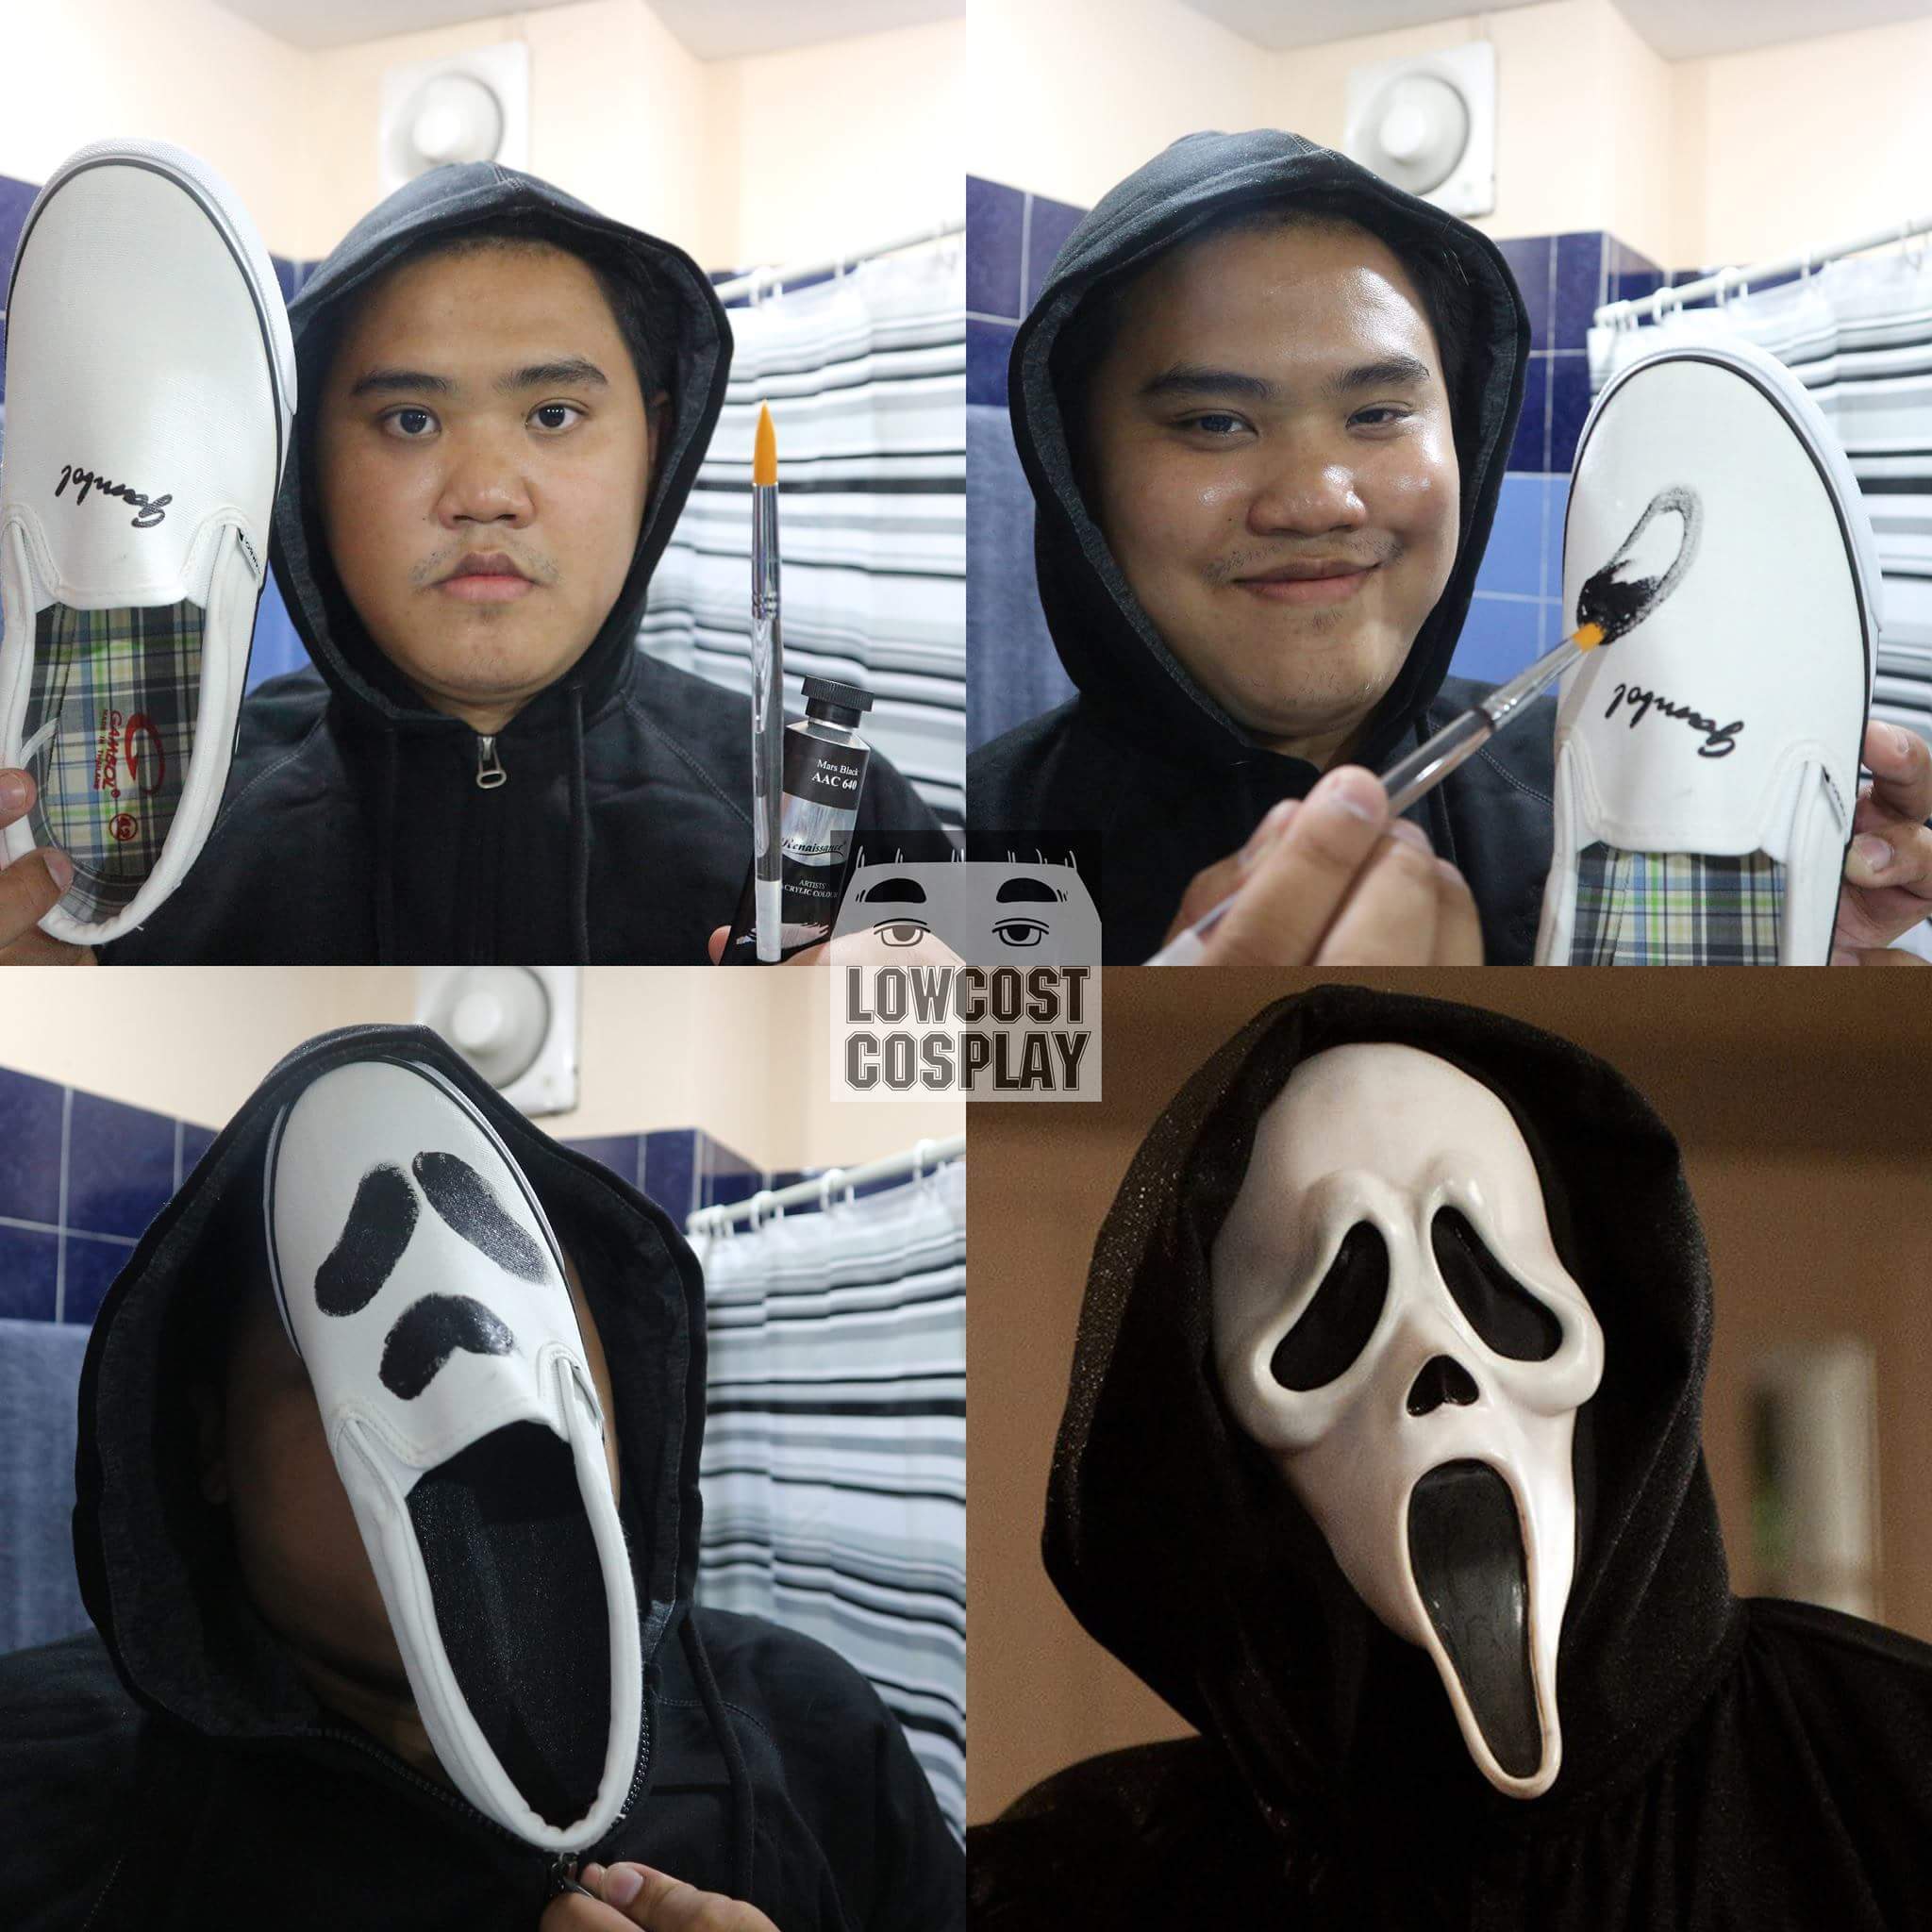 Low Cost Cosplay at it again - meme